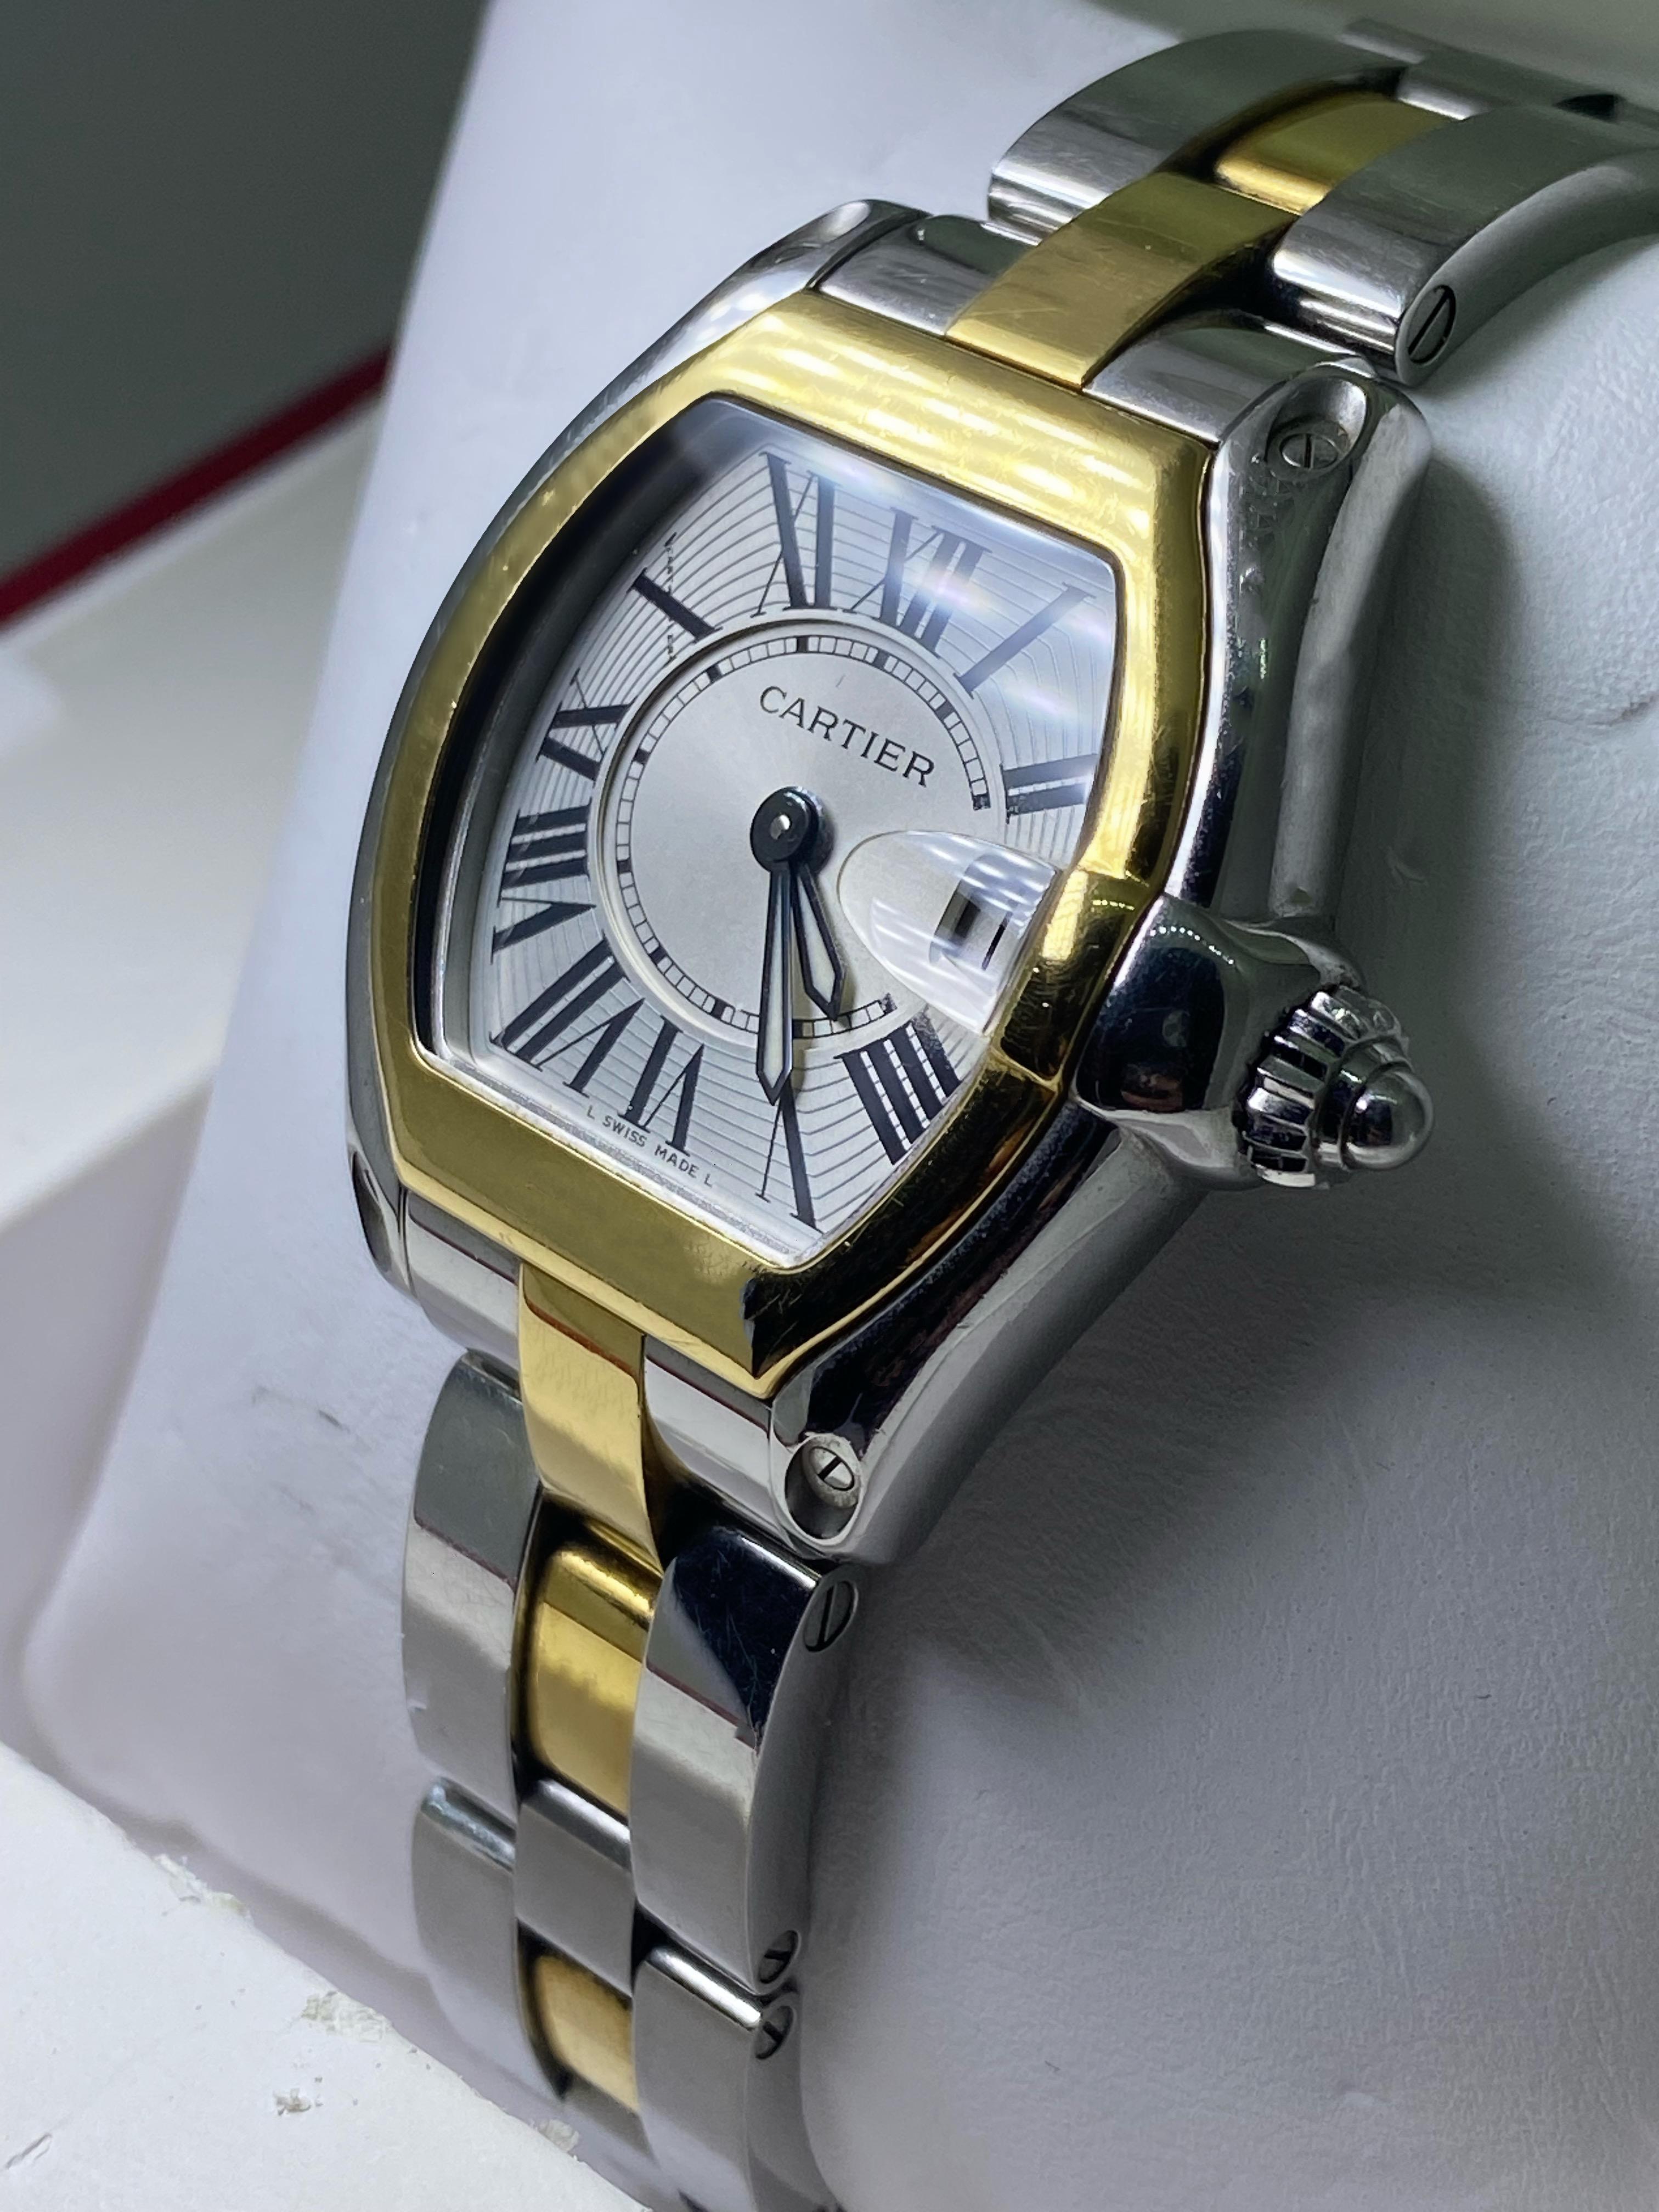 Cartier Roadster ref 2675 Two-Tone Gold & Steel 
is an sophisticated & highly sought after ladies' timepiece

~~~~~~

It features an eye-catching two-tone case,
measuring 32 x 38mm (including lugs)
of elegant tonneau / barrel shape
accented by 18K